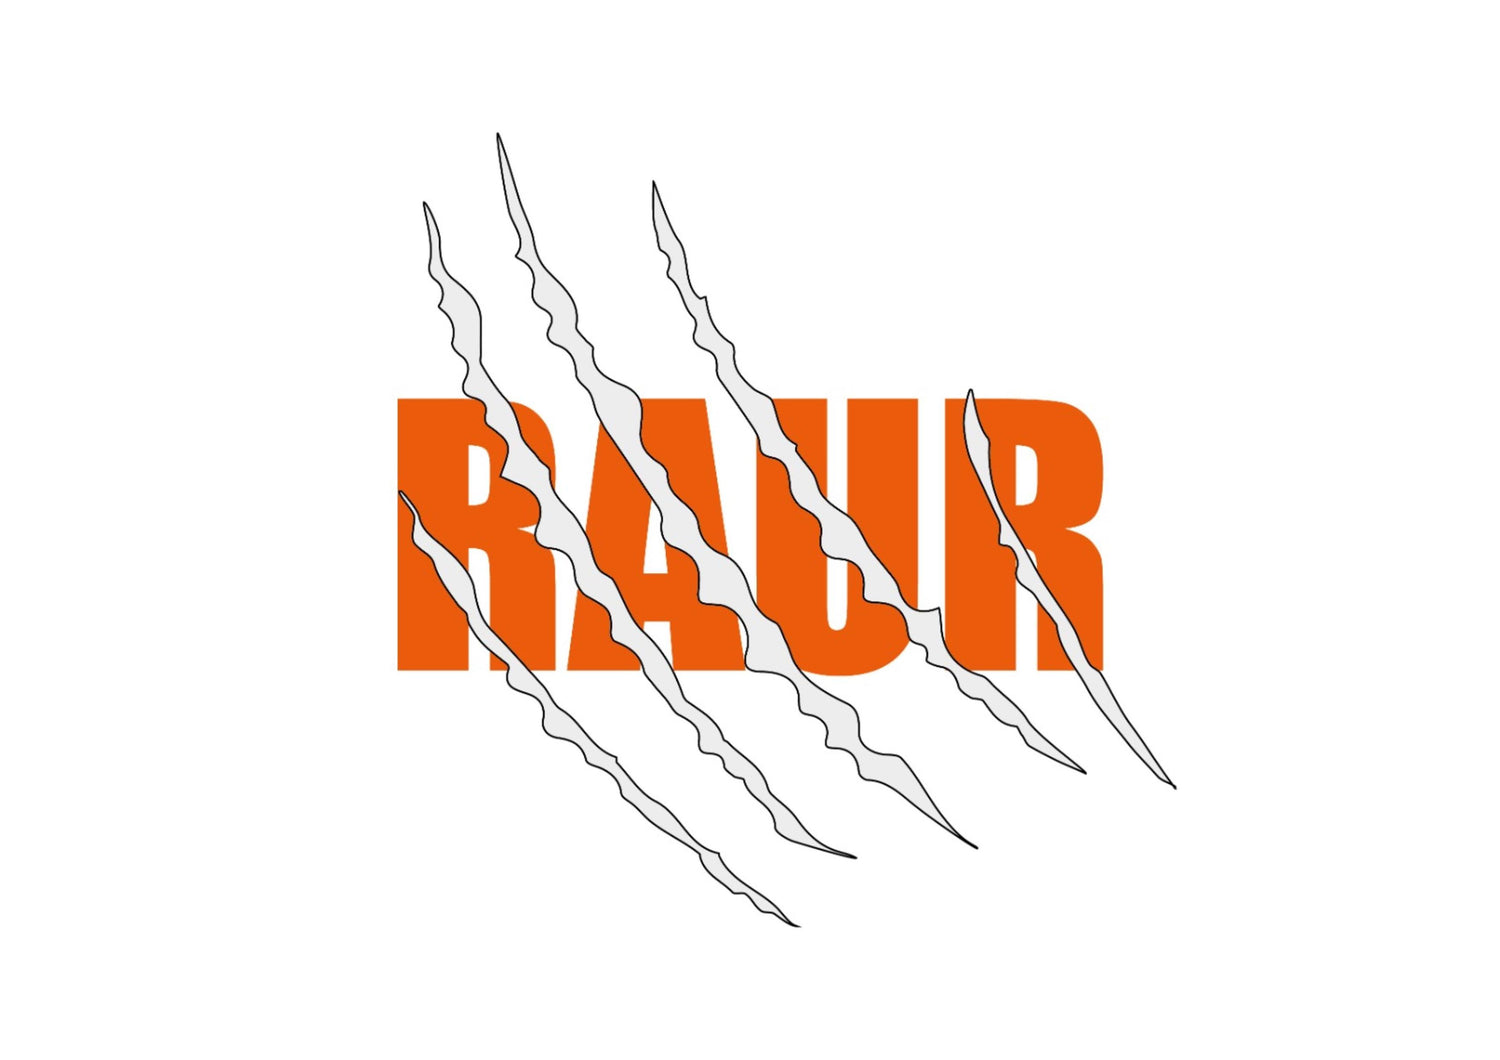 Here at RAUR we have durable and fashionable gym wear that can be worn for any workout you have!